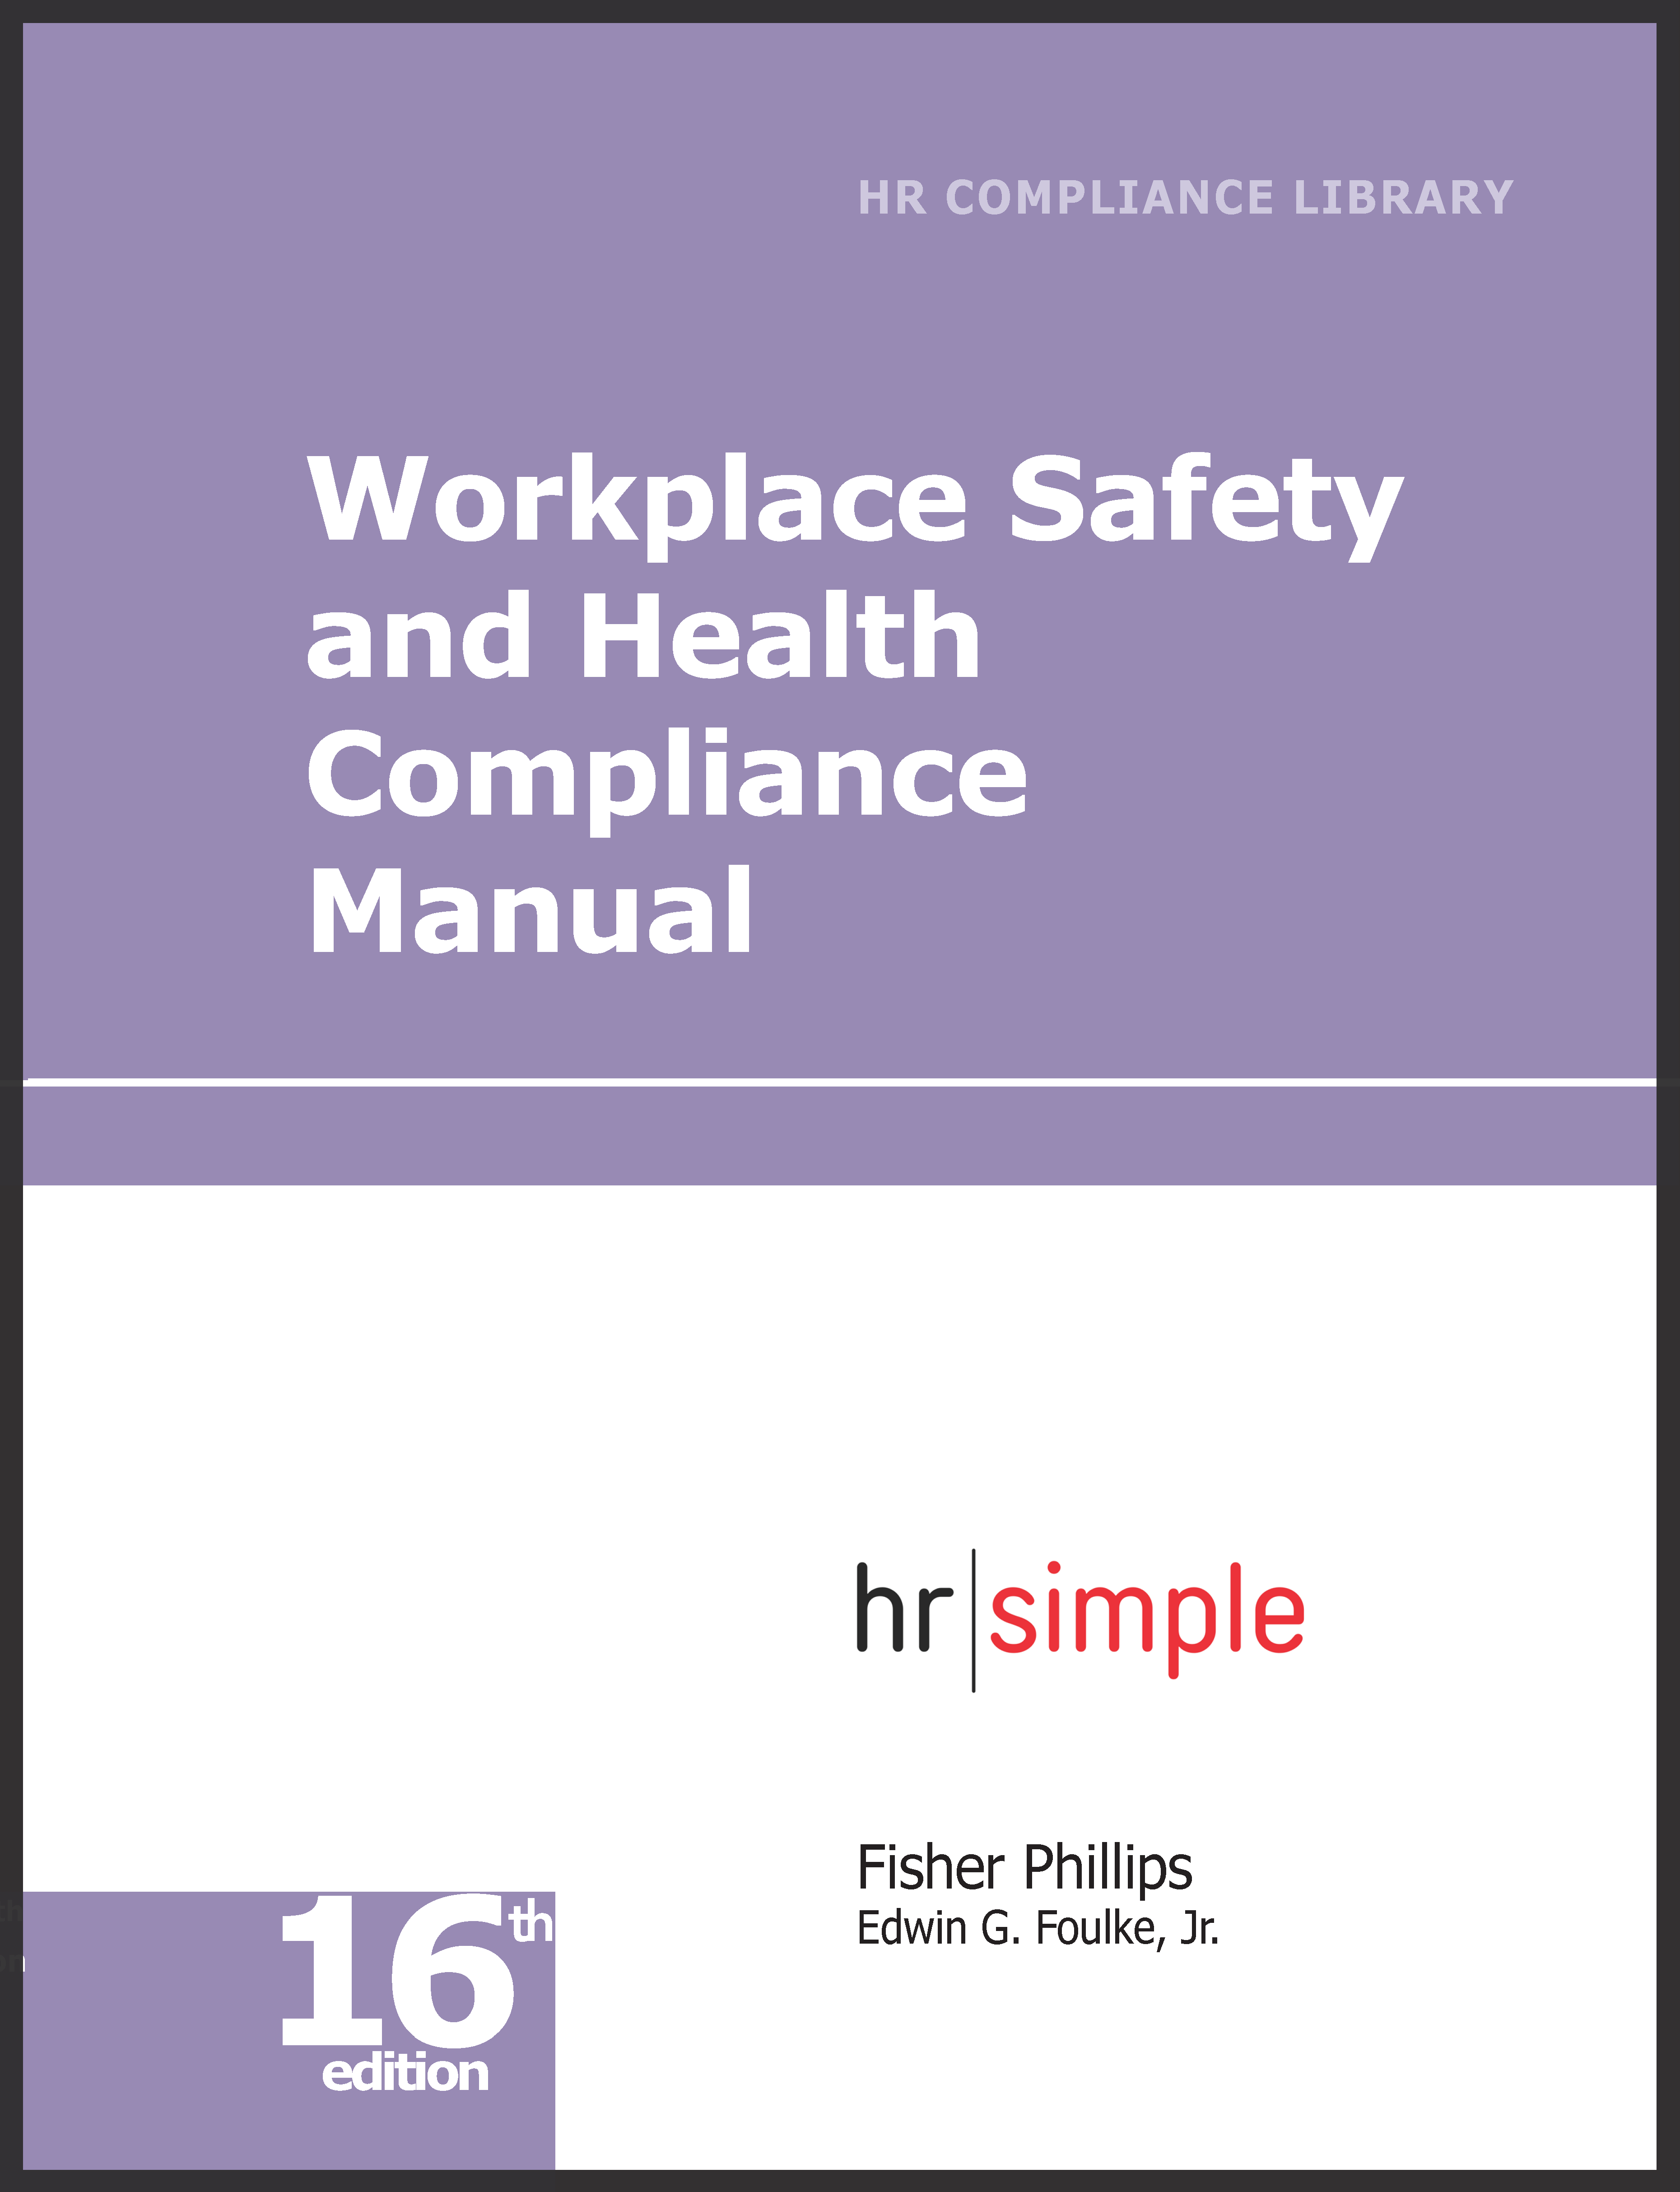 Workplace Safety and Health employment law image, remote work, labor laws, employment laws, right to work, order of protection, minimum wage